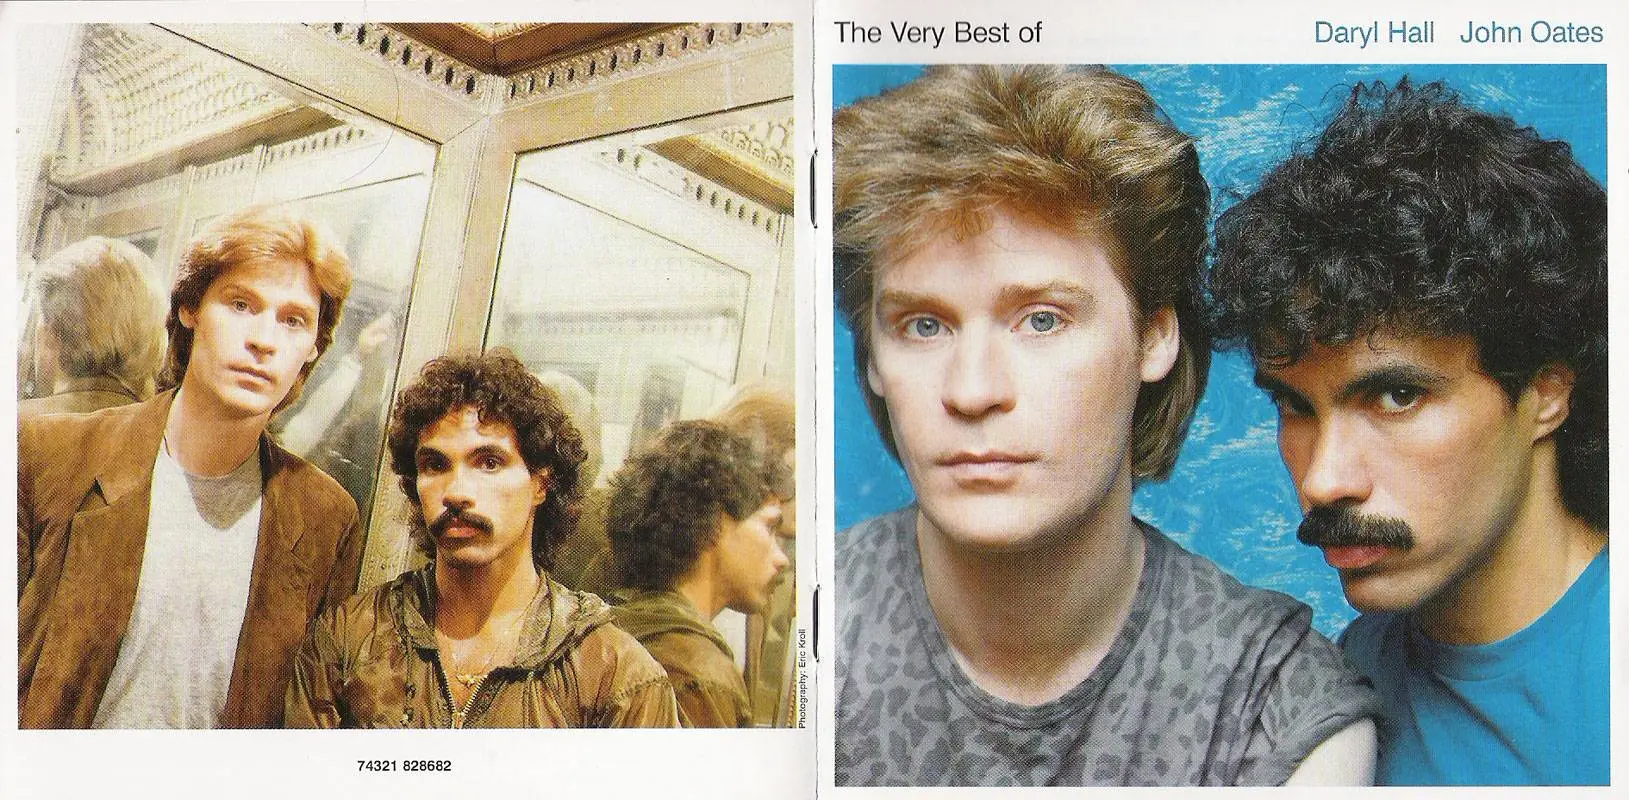 Daryl hall out of touch. Группа Hall & oates. Дэрил Холл и Джон Оутс. Daryl Hall & John oates. Дэрил Холл в молодости.